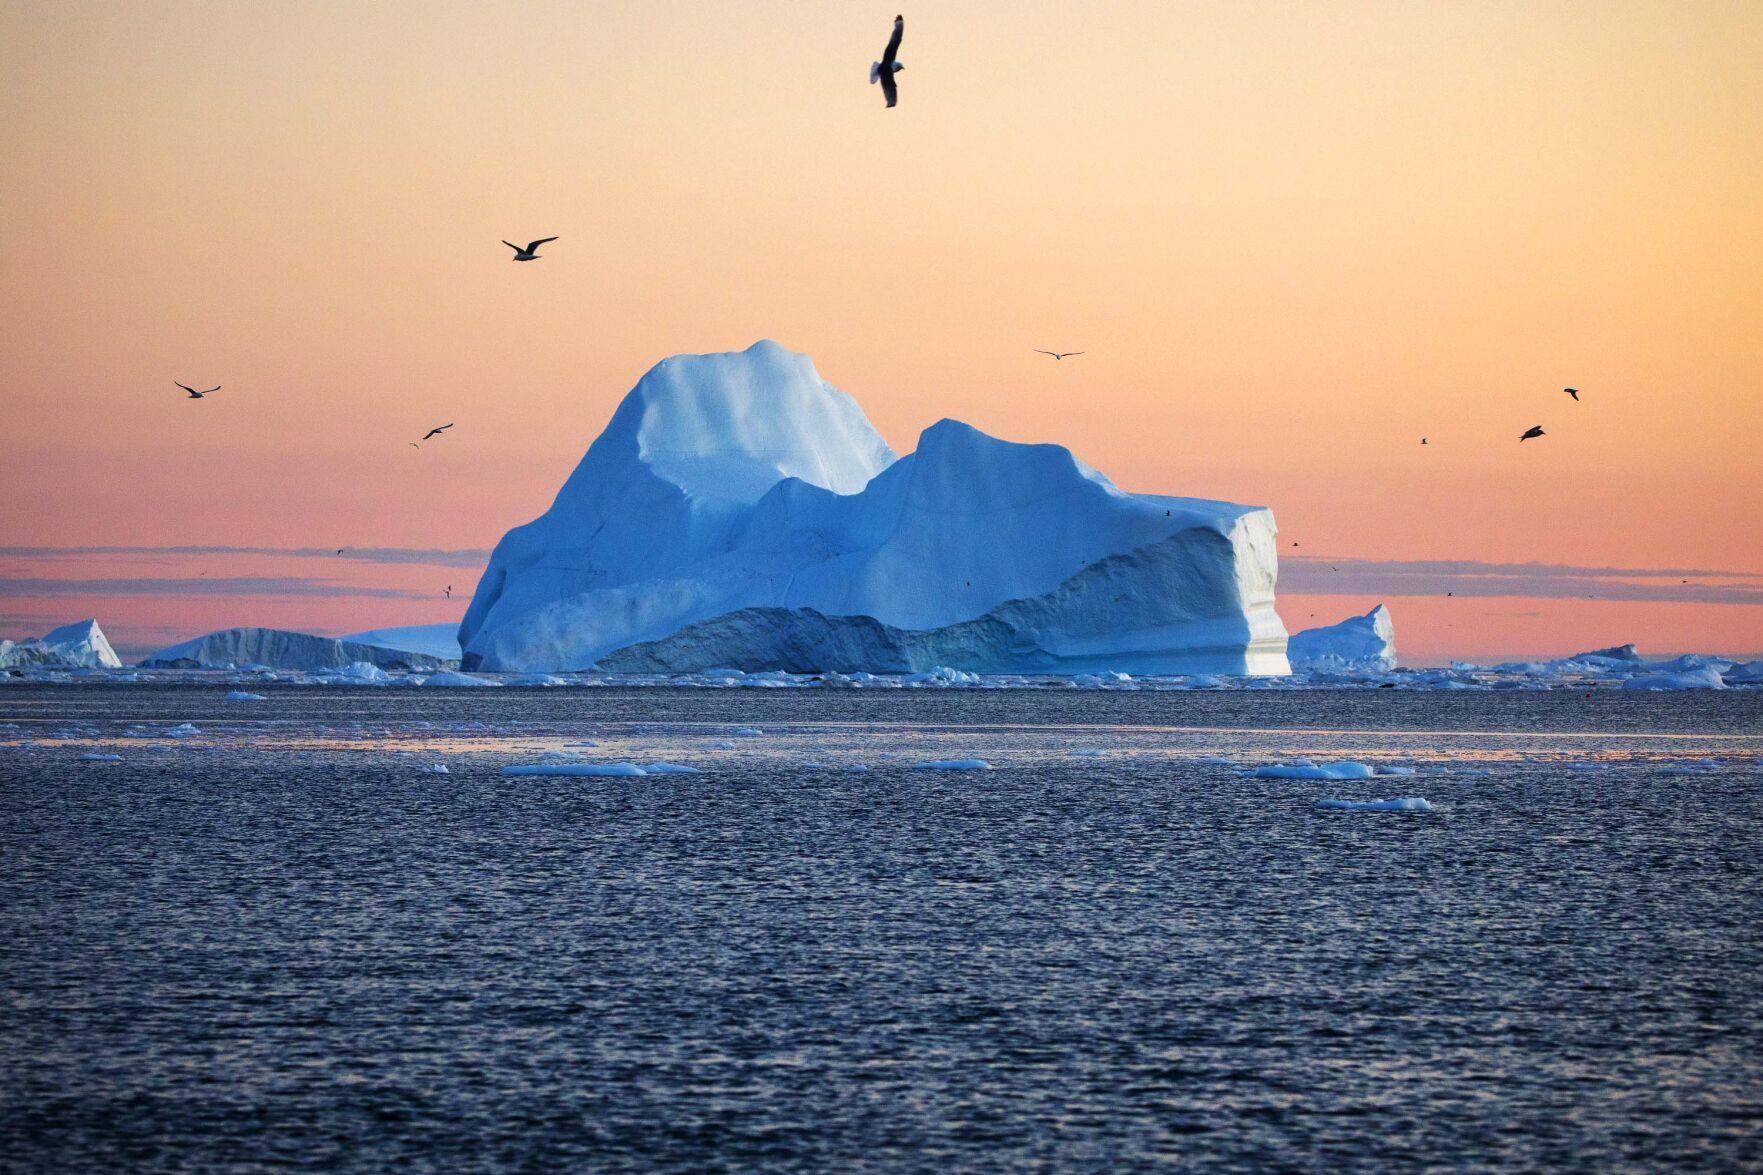 Chasing the light: Study finds new clues about warming in the Arctic